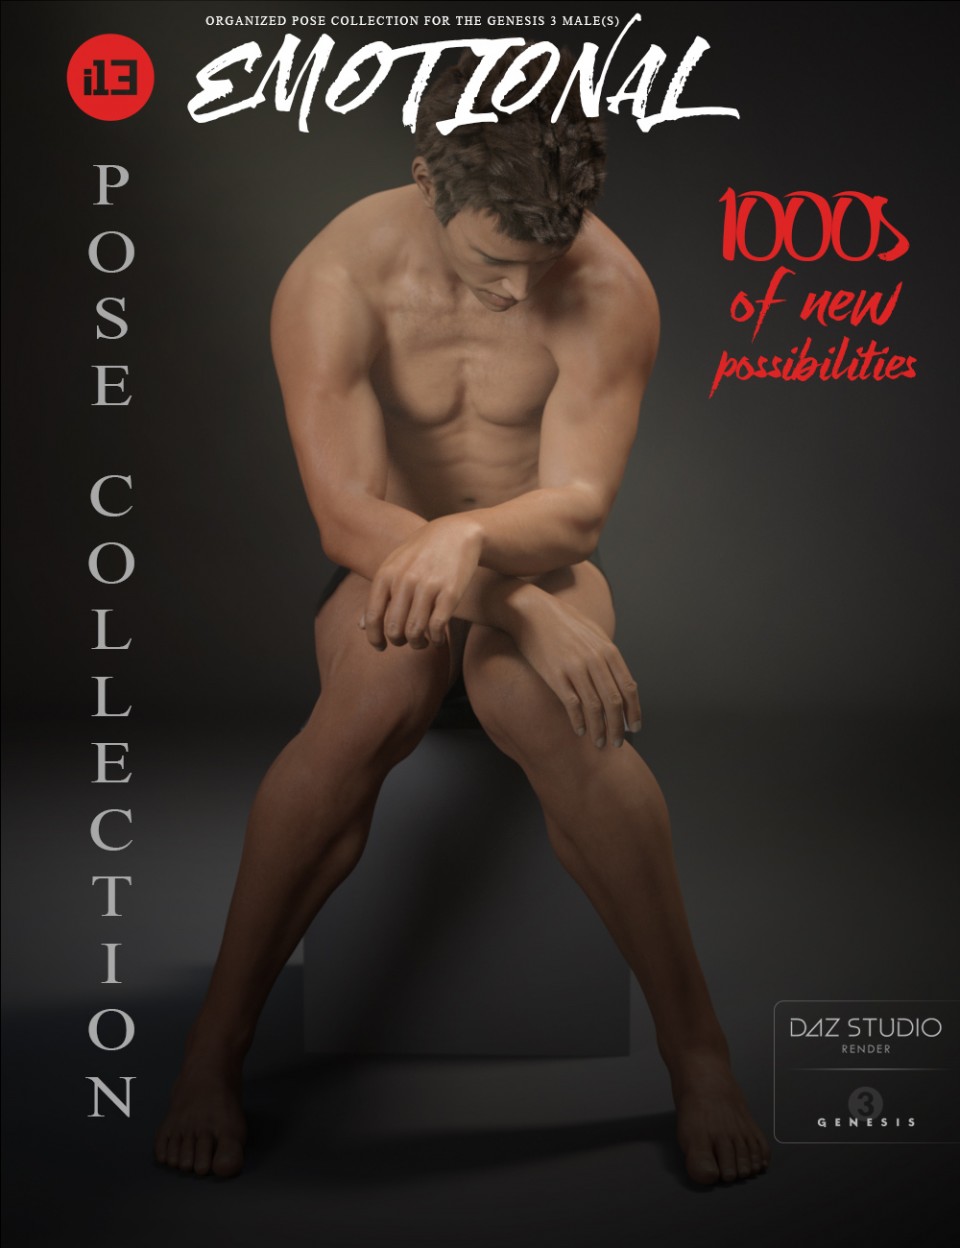 i13 Emotional Pose Collection for the Genesis 3 Male(s)_DAZ3DDL